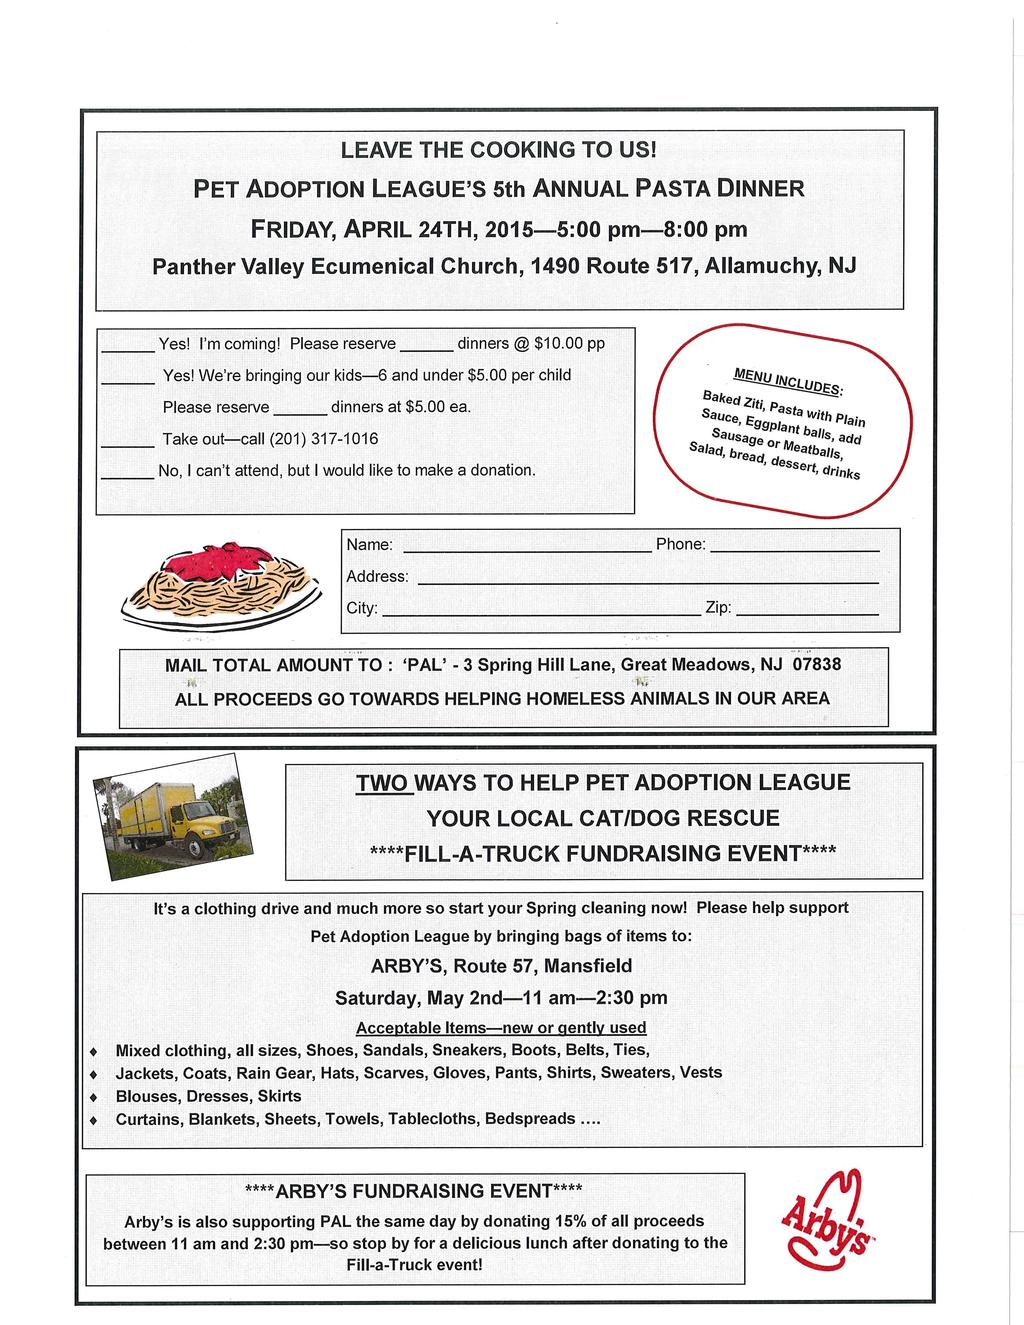 LEAVE THE COOKING TO US! PET ADOPTION LEAGUE'S 5th ANNUAL PASTA DINNER FRIDAY, APRIL 24TH, 2015 5:00 pm 8:00 pm Panther Valley Ecumenical Church, 1490 Route 517, Allamuchy, NJ dinners @ $10.00 pp Yes!